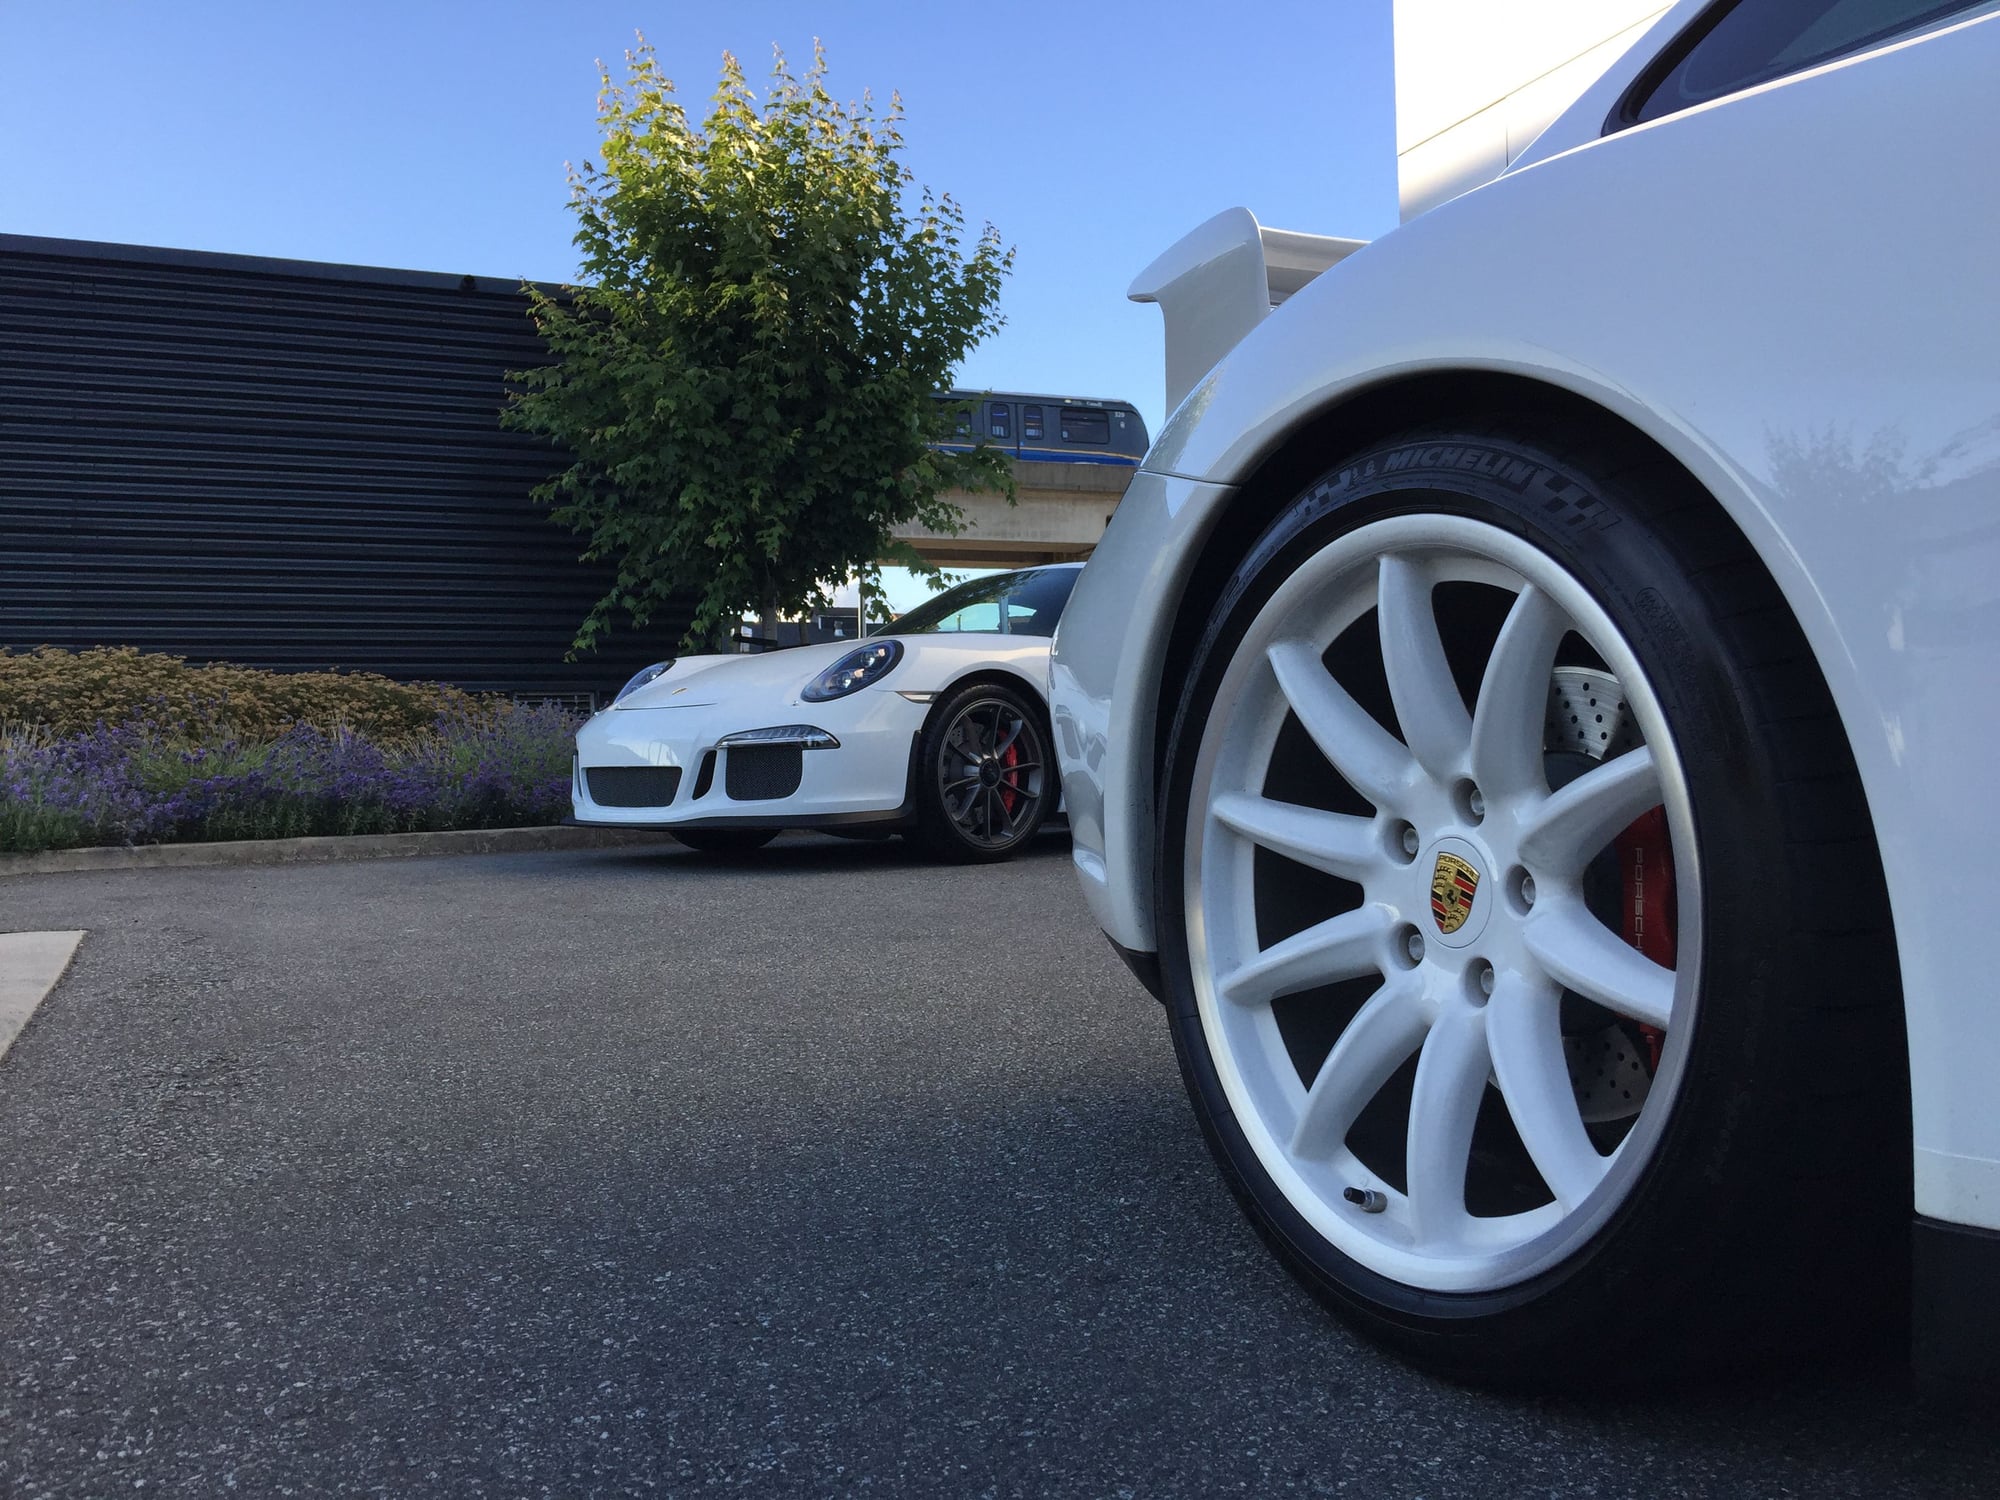 2011 Porsche 911 - 2011 Porsche 997.2 GTS (Ultra rare build. Full Aero, Carbon Buckets, Low Milage) - Used - VIN WP0AB2A99BS721044 - 6 cyl - 2WD - Automatic - Coupe - White - Vancouver Canada, BC V6Z3E7, Canada